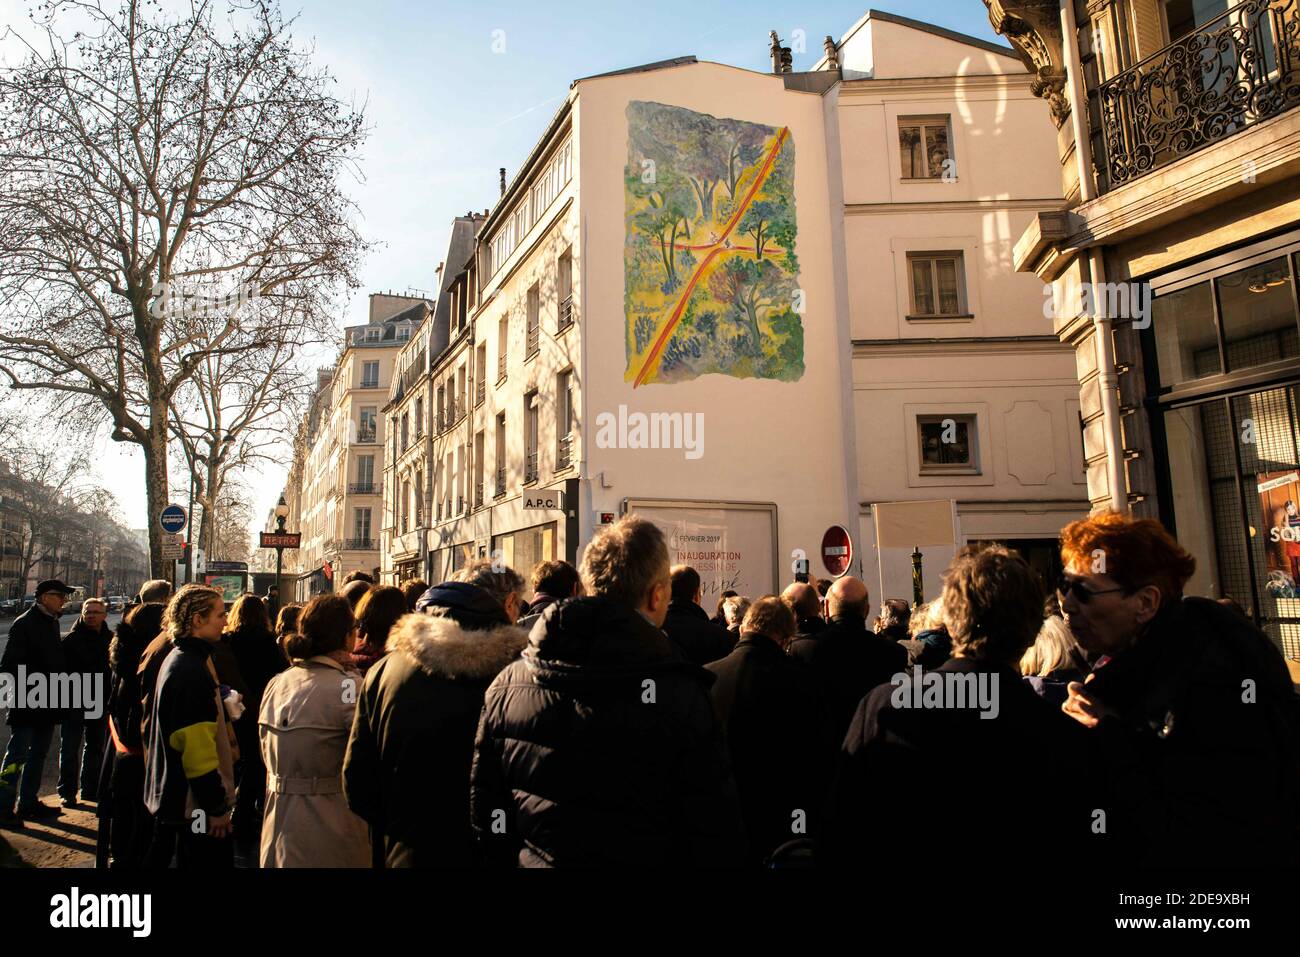 A wall fresco from a artwork of artist Jean-Jacques Sempe is seen at the  crossing of Boulevard des Filles du Calvaire and Rue Froissard, 3rd District  of Paris, France, Febuary 16, 2019.